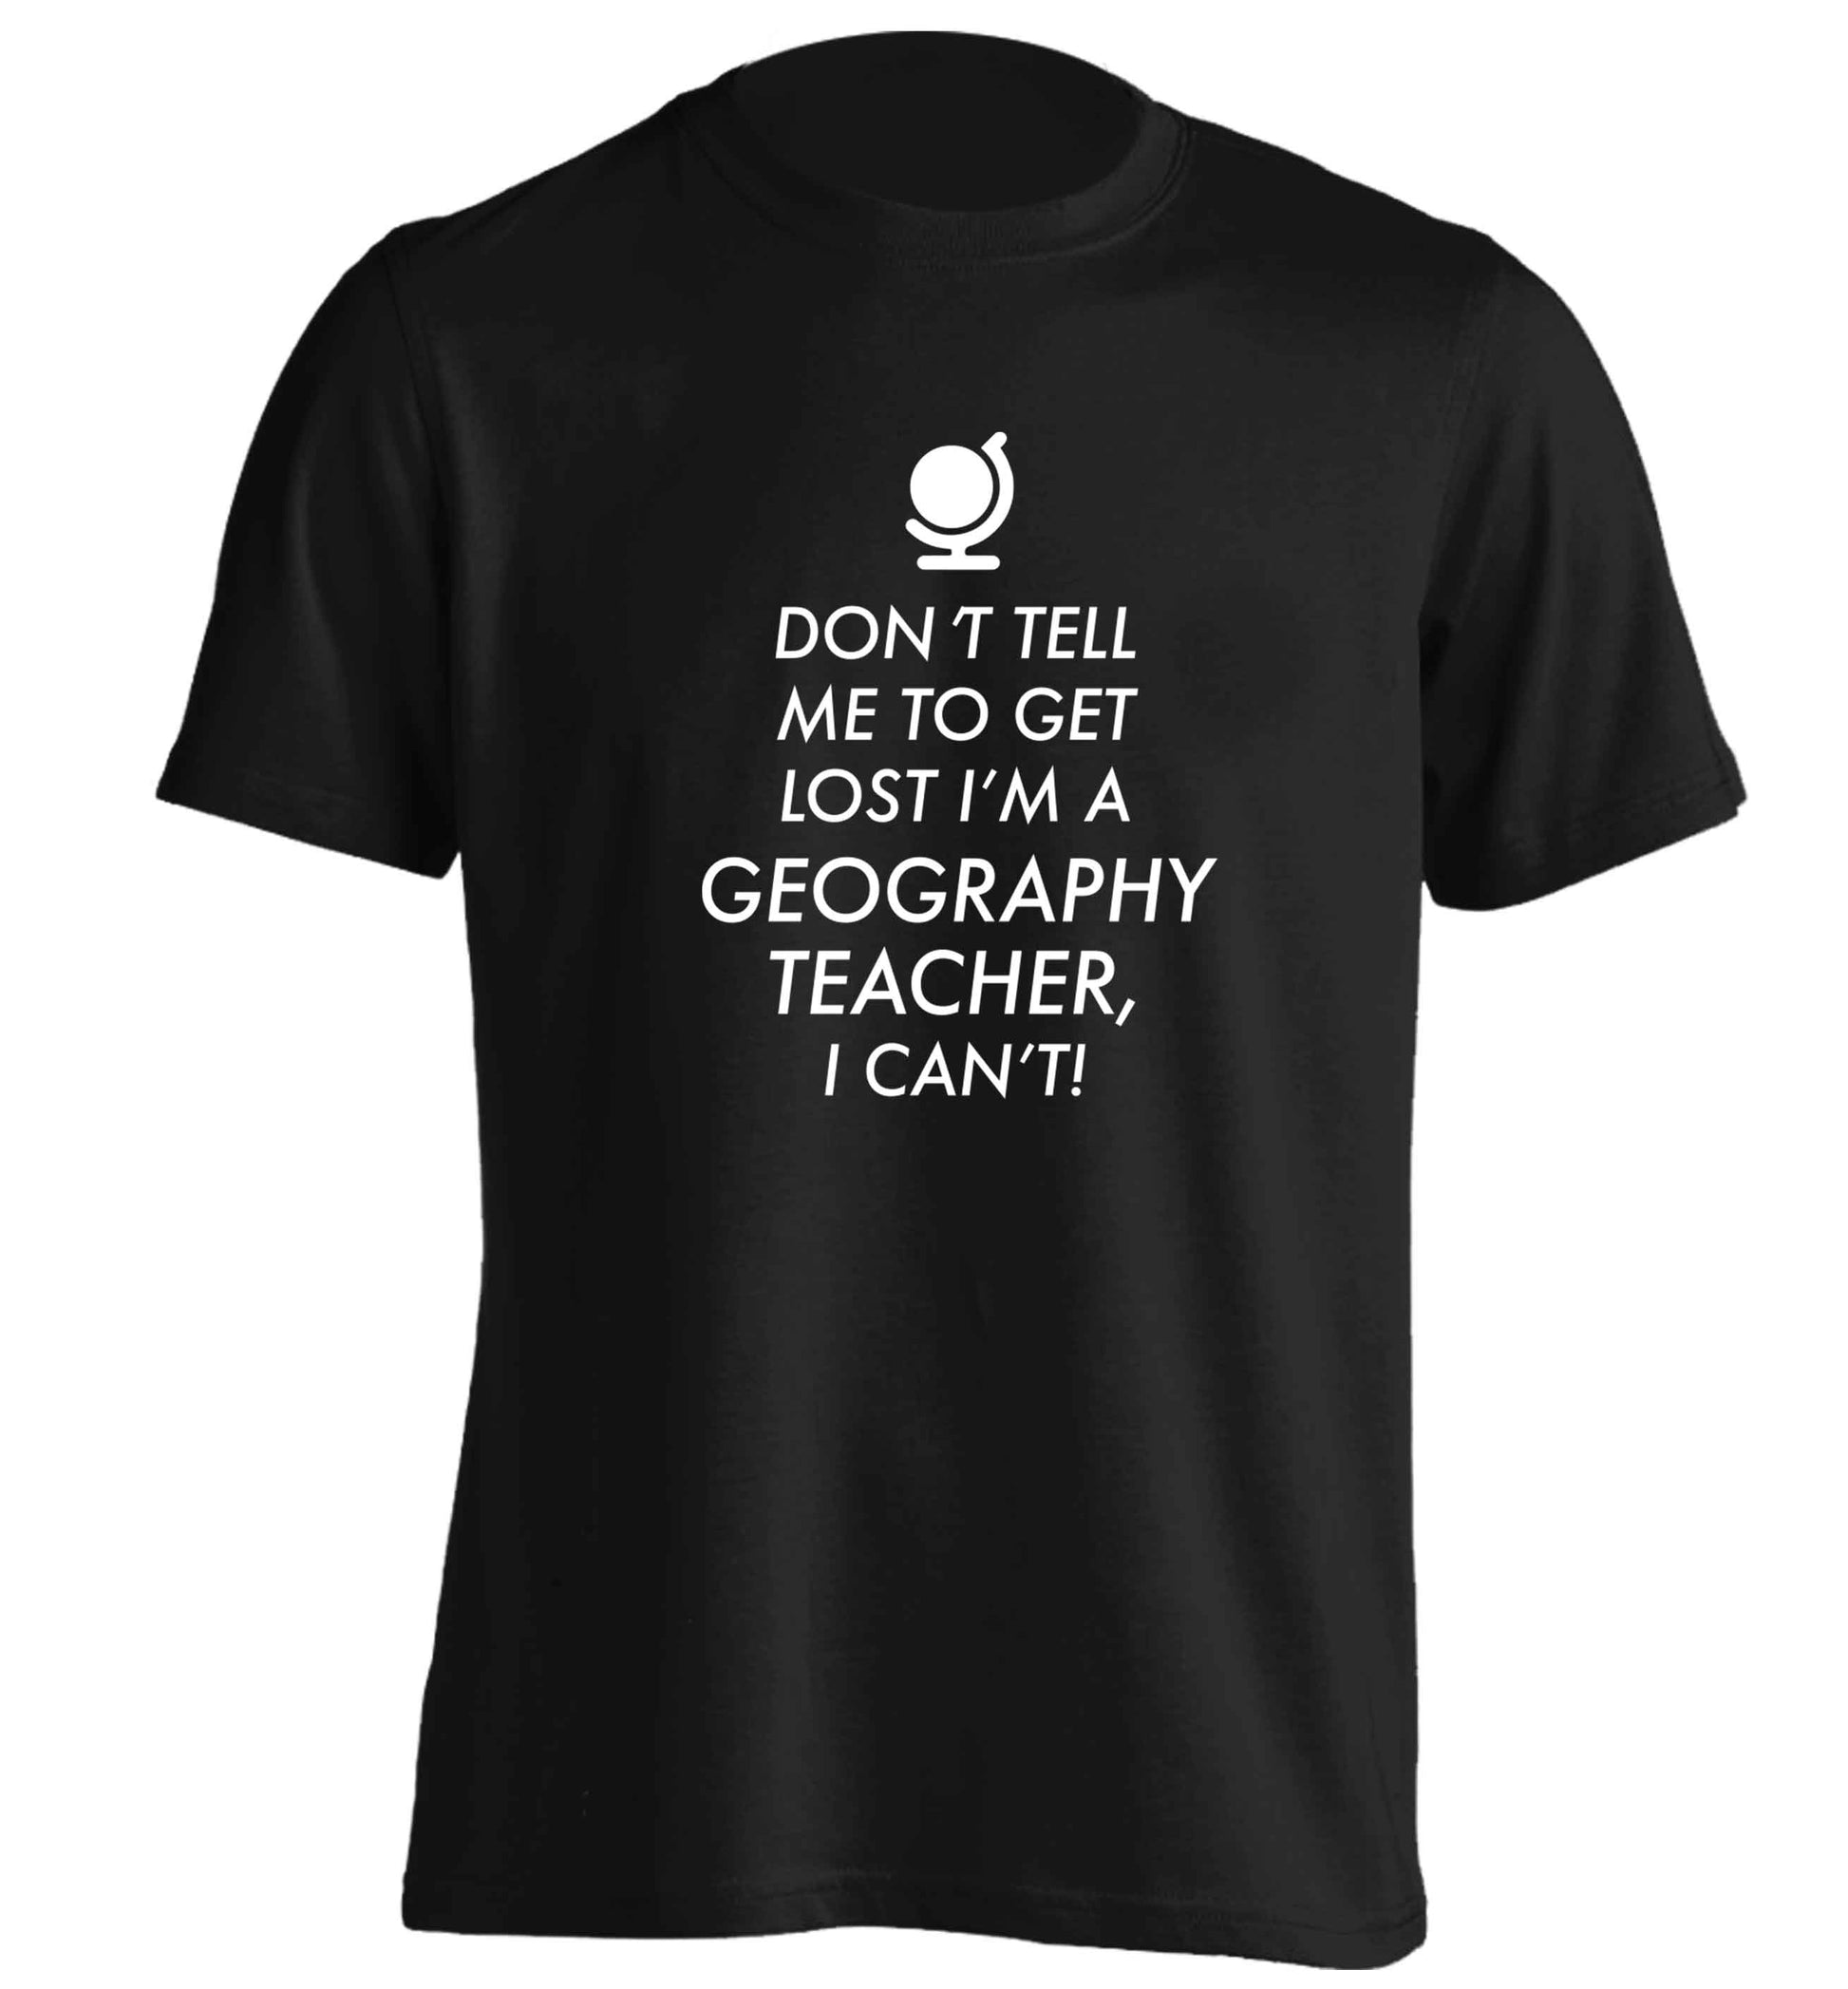 Don't tell me to get lost I'm a geography teacher, I can't adults unisex black Tshirt 2XL